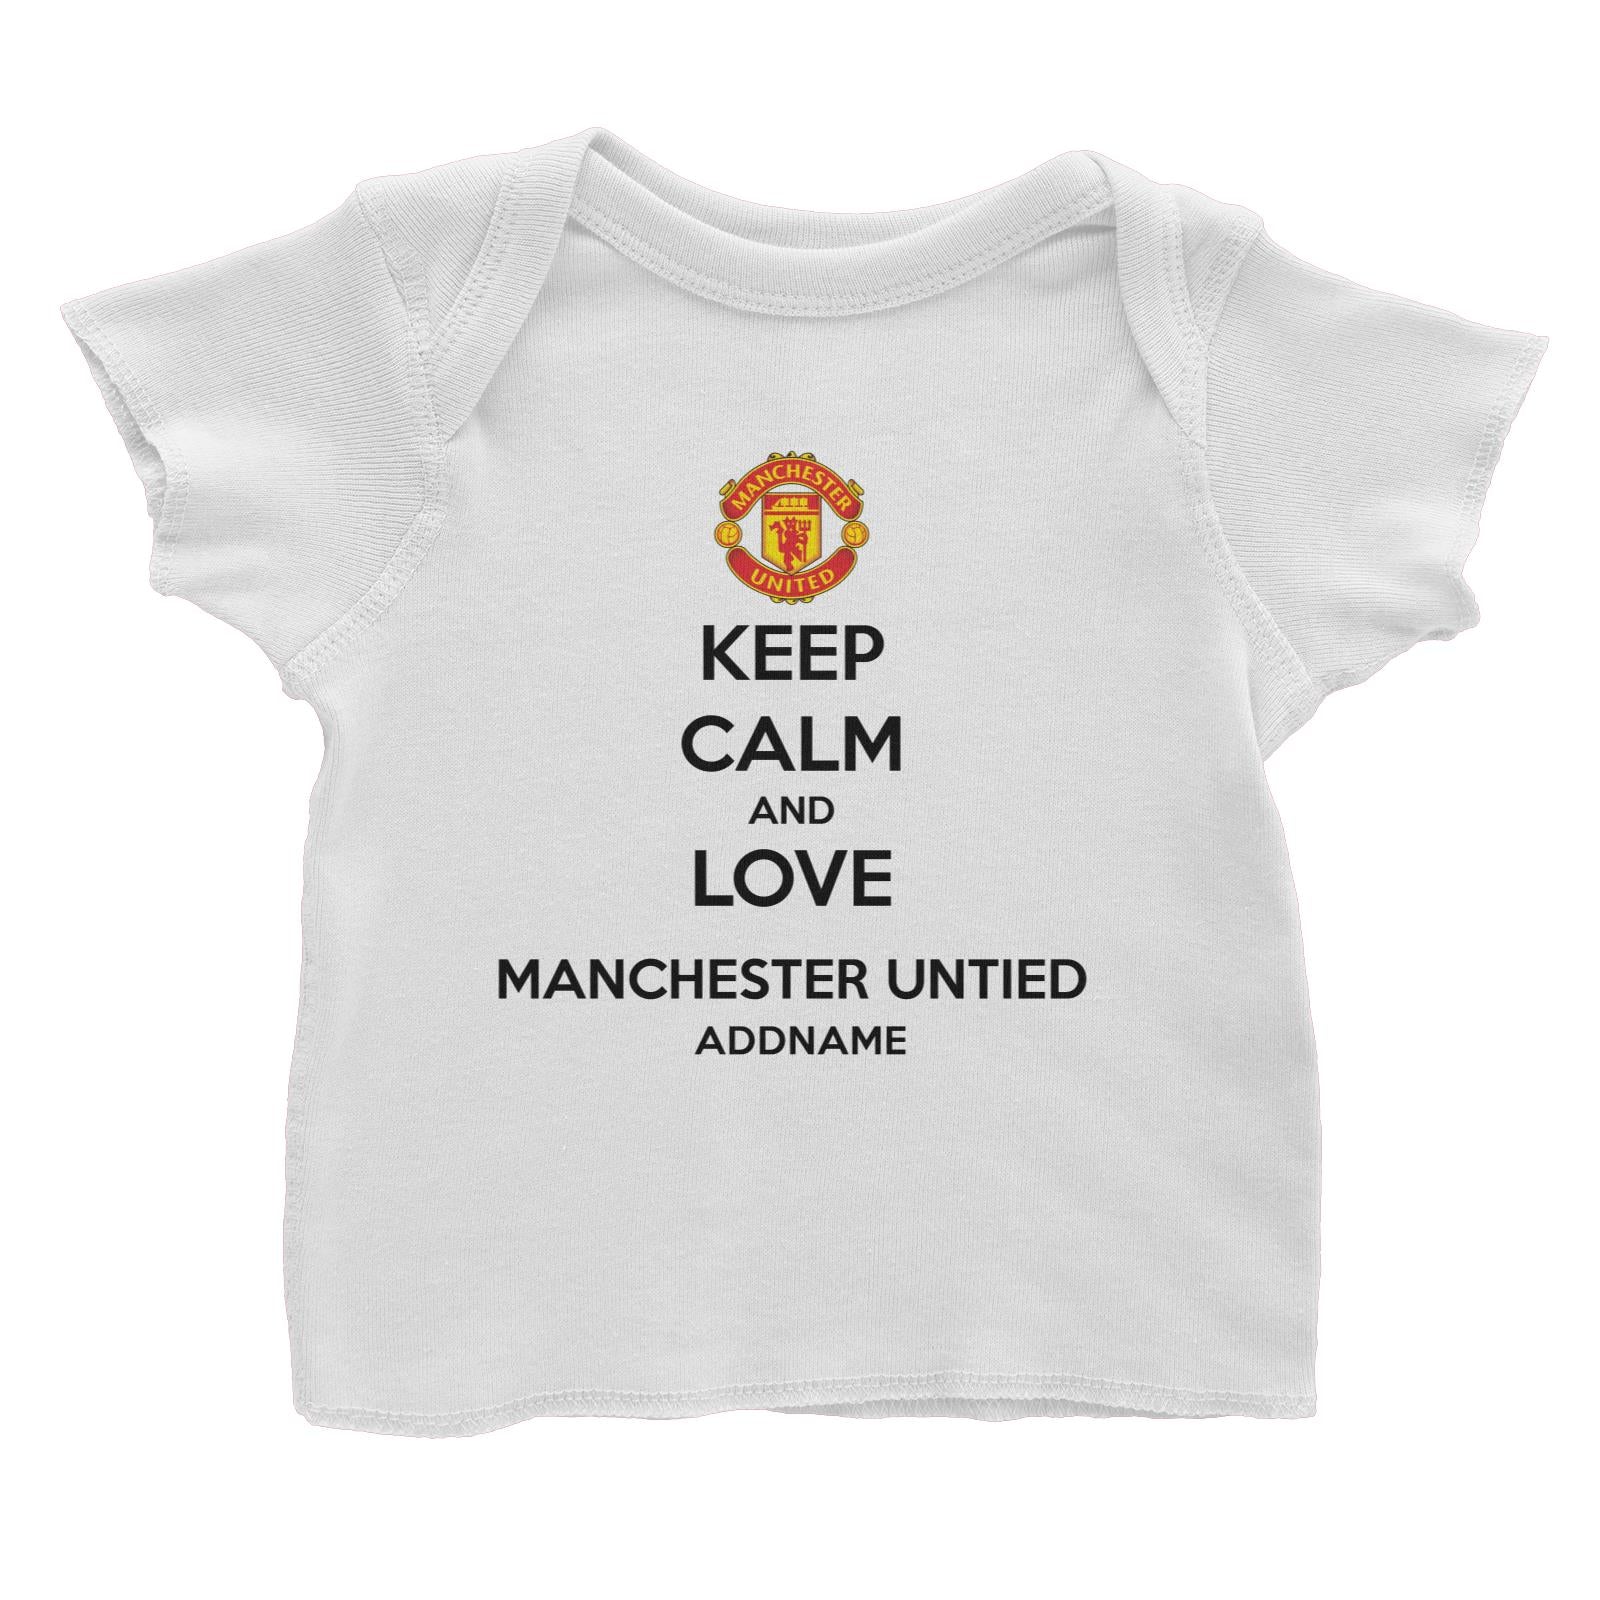 Manchester United Football Keep Calm And Love Series Addname Baby T-Shirt